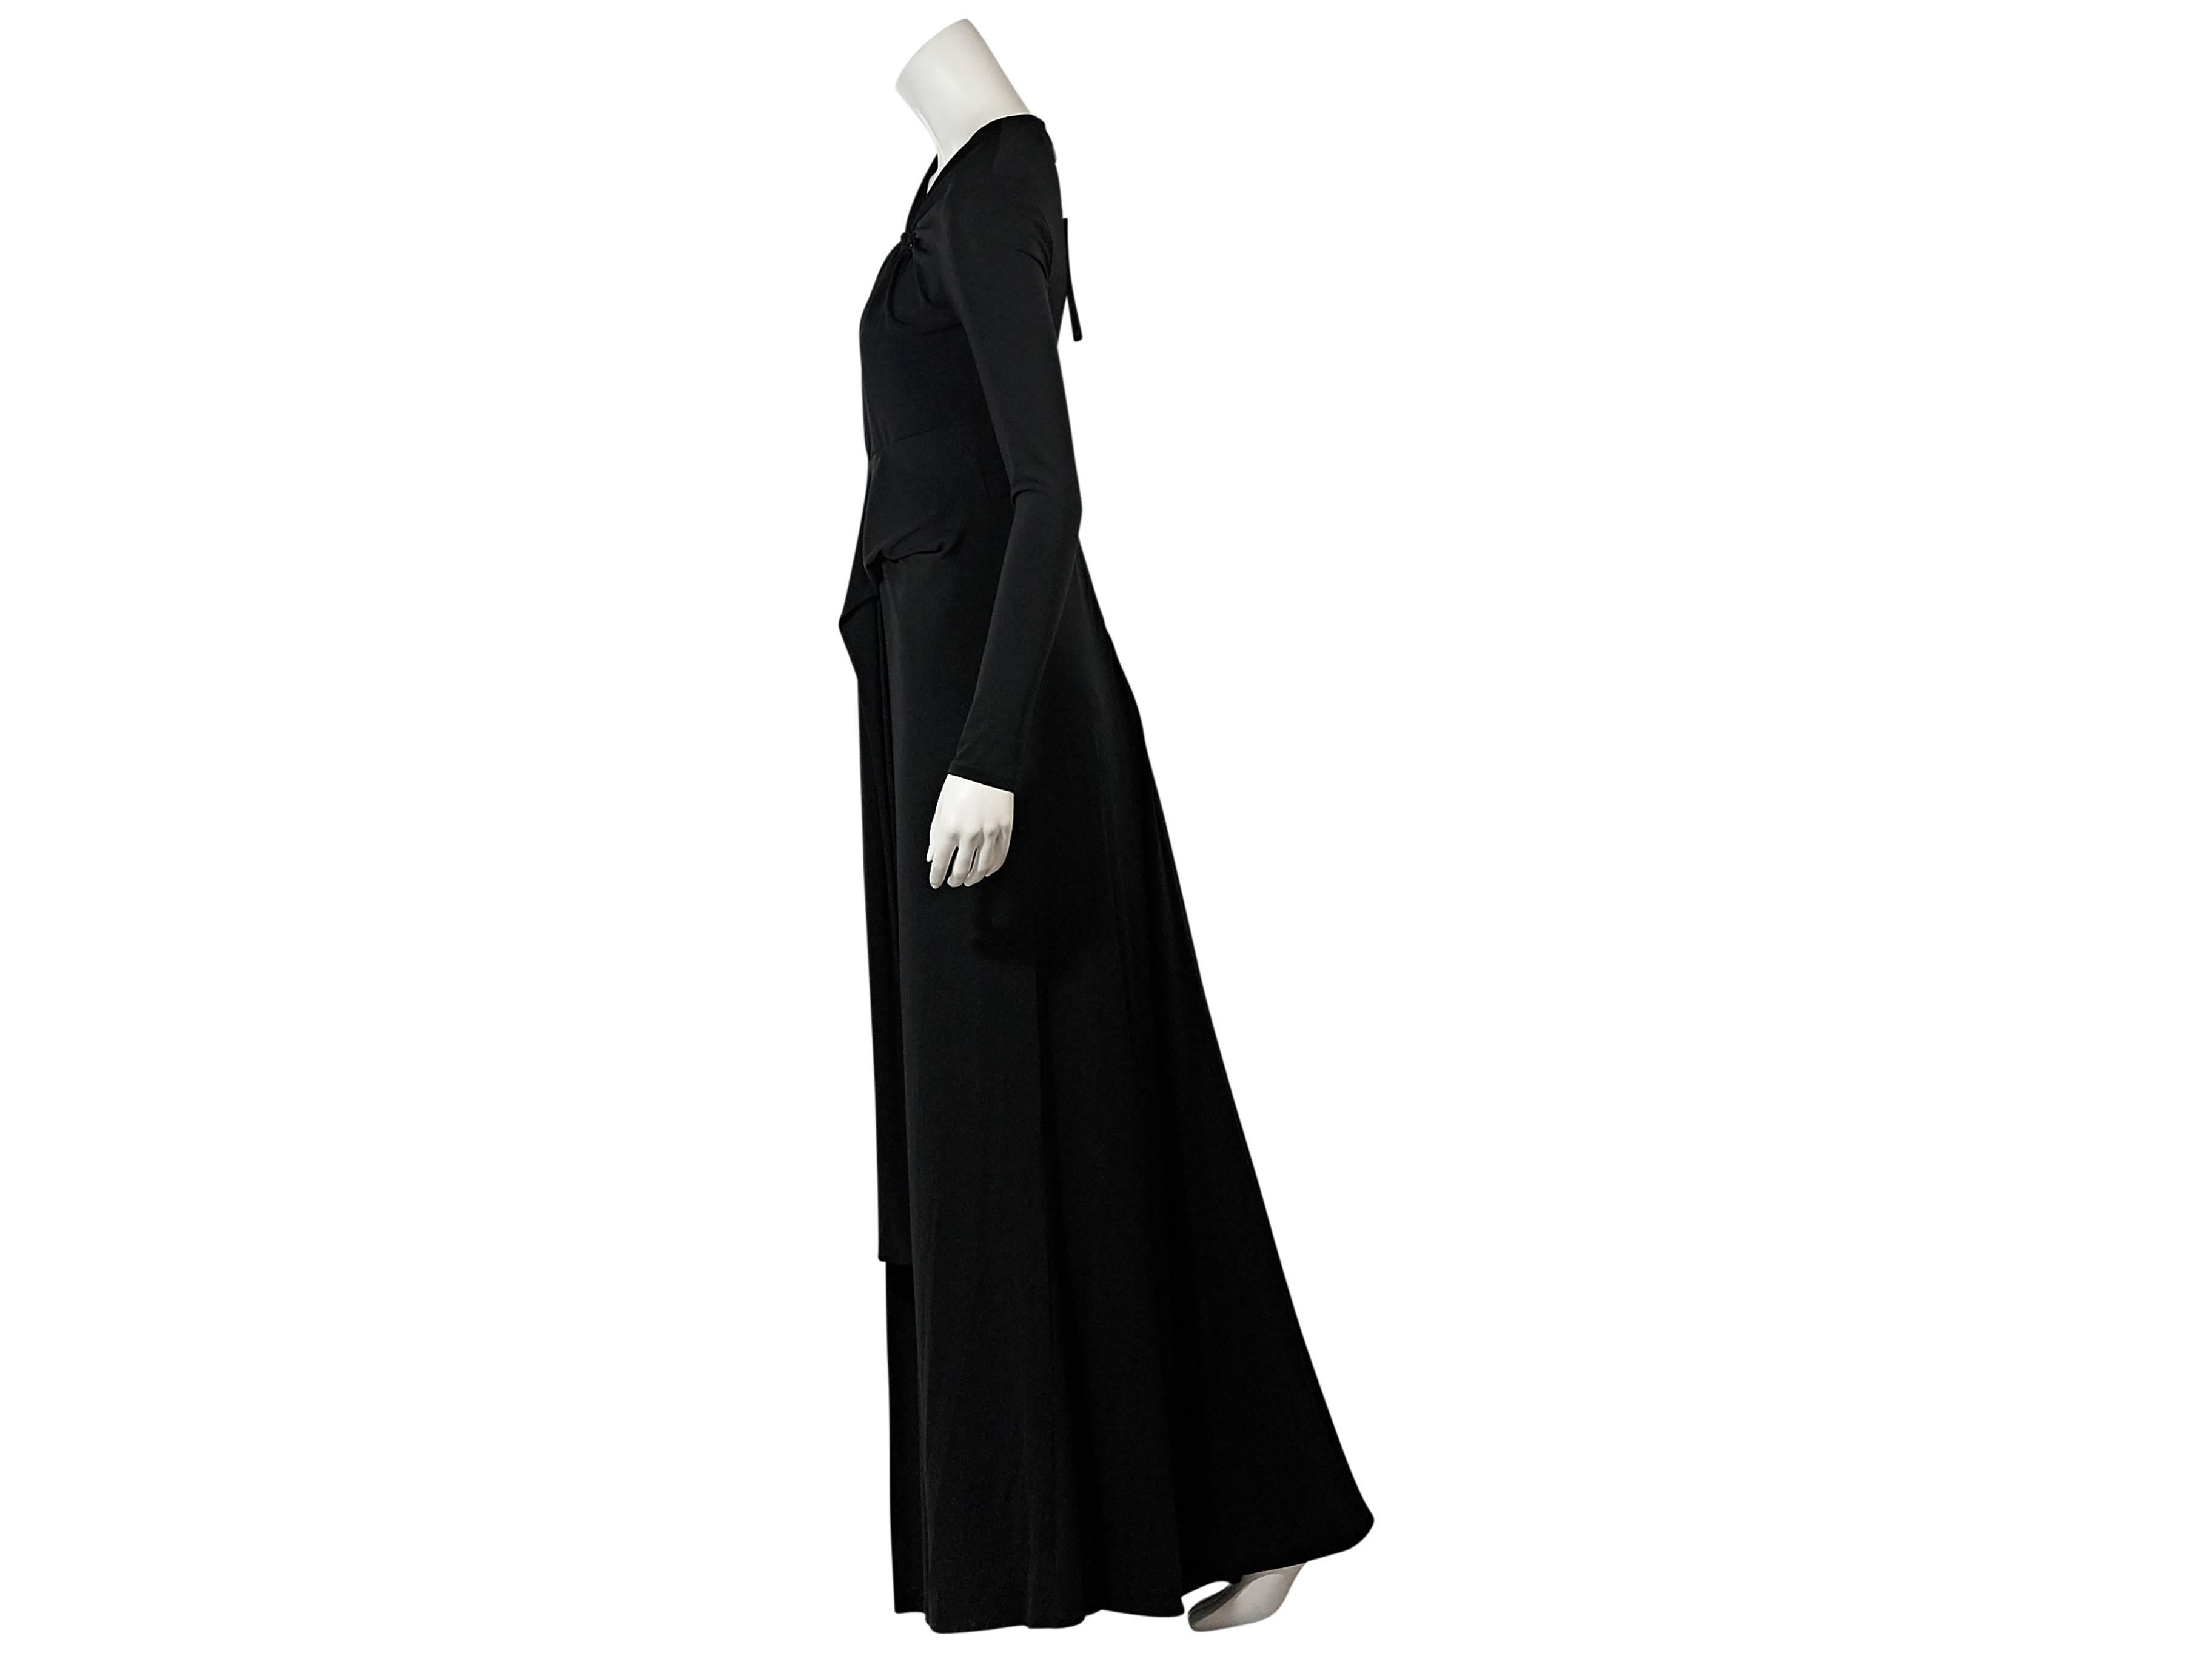 Product details:  Black long-sleeve gown by Halston Heritage.  Deep slit neck.  Long sleeves.  Gathered front details.  Concealed back zip closure.    
Condition: New with tags. 
Est. Retail $ 495.00